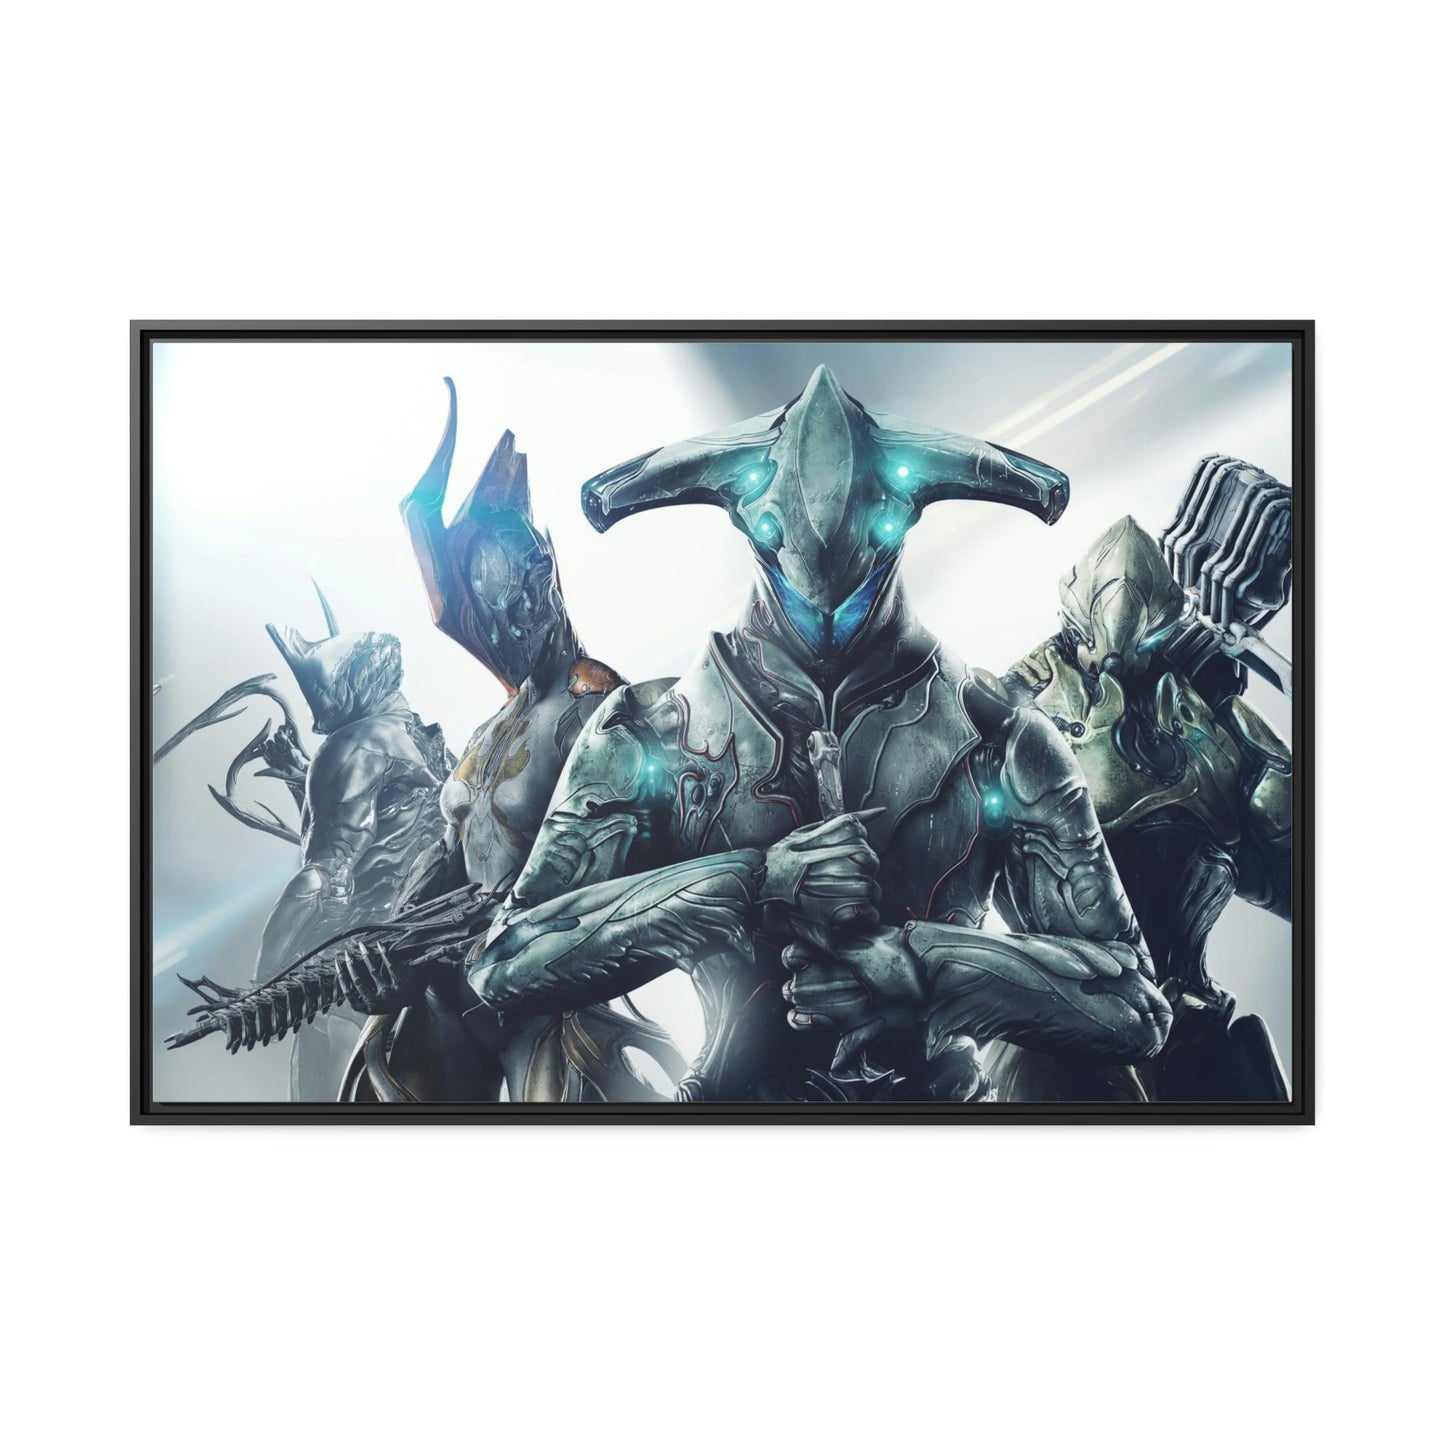 Warframe: Poster and Canvas Prints of Alien Creatures